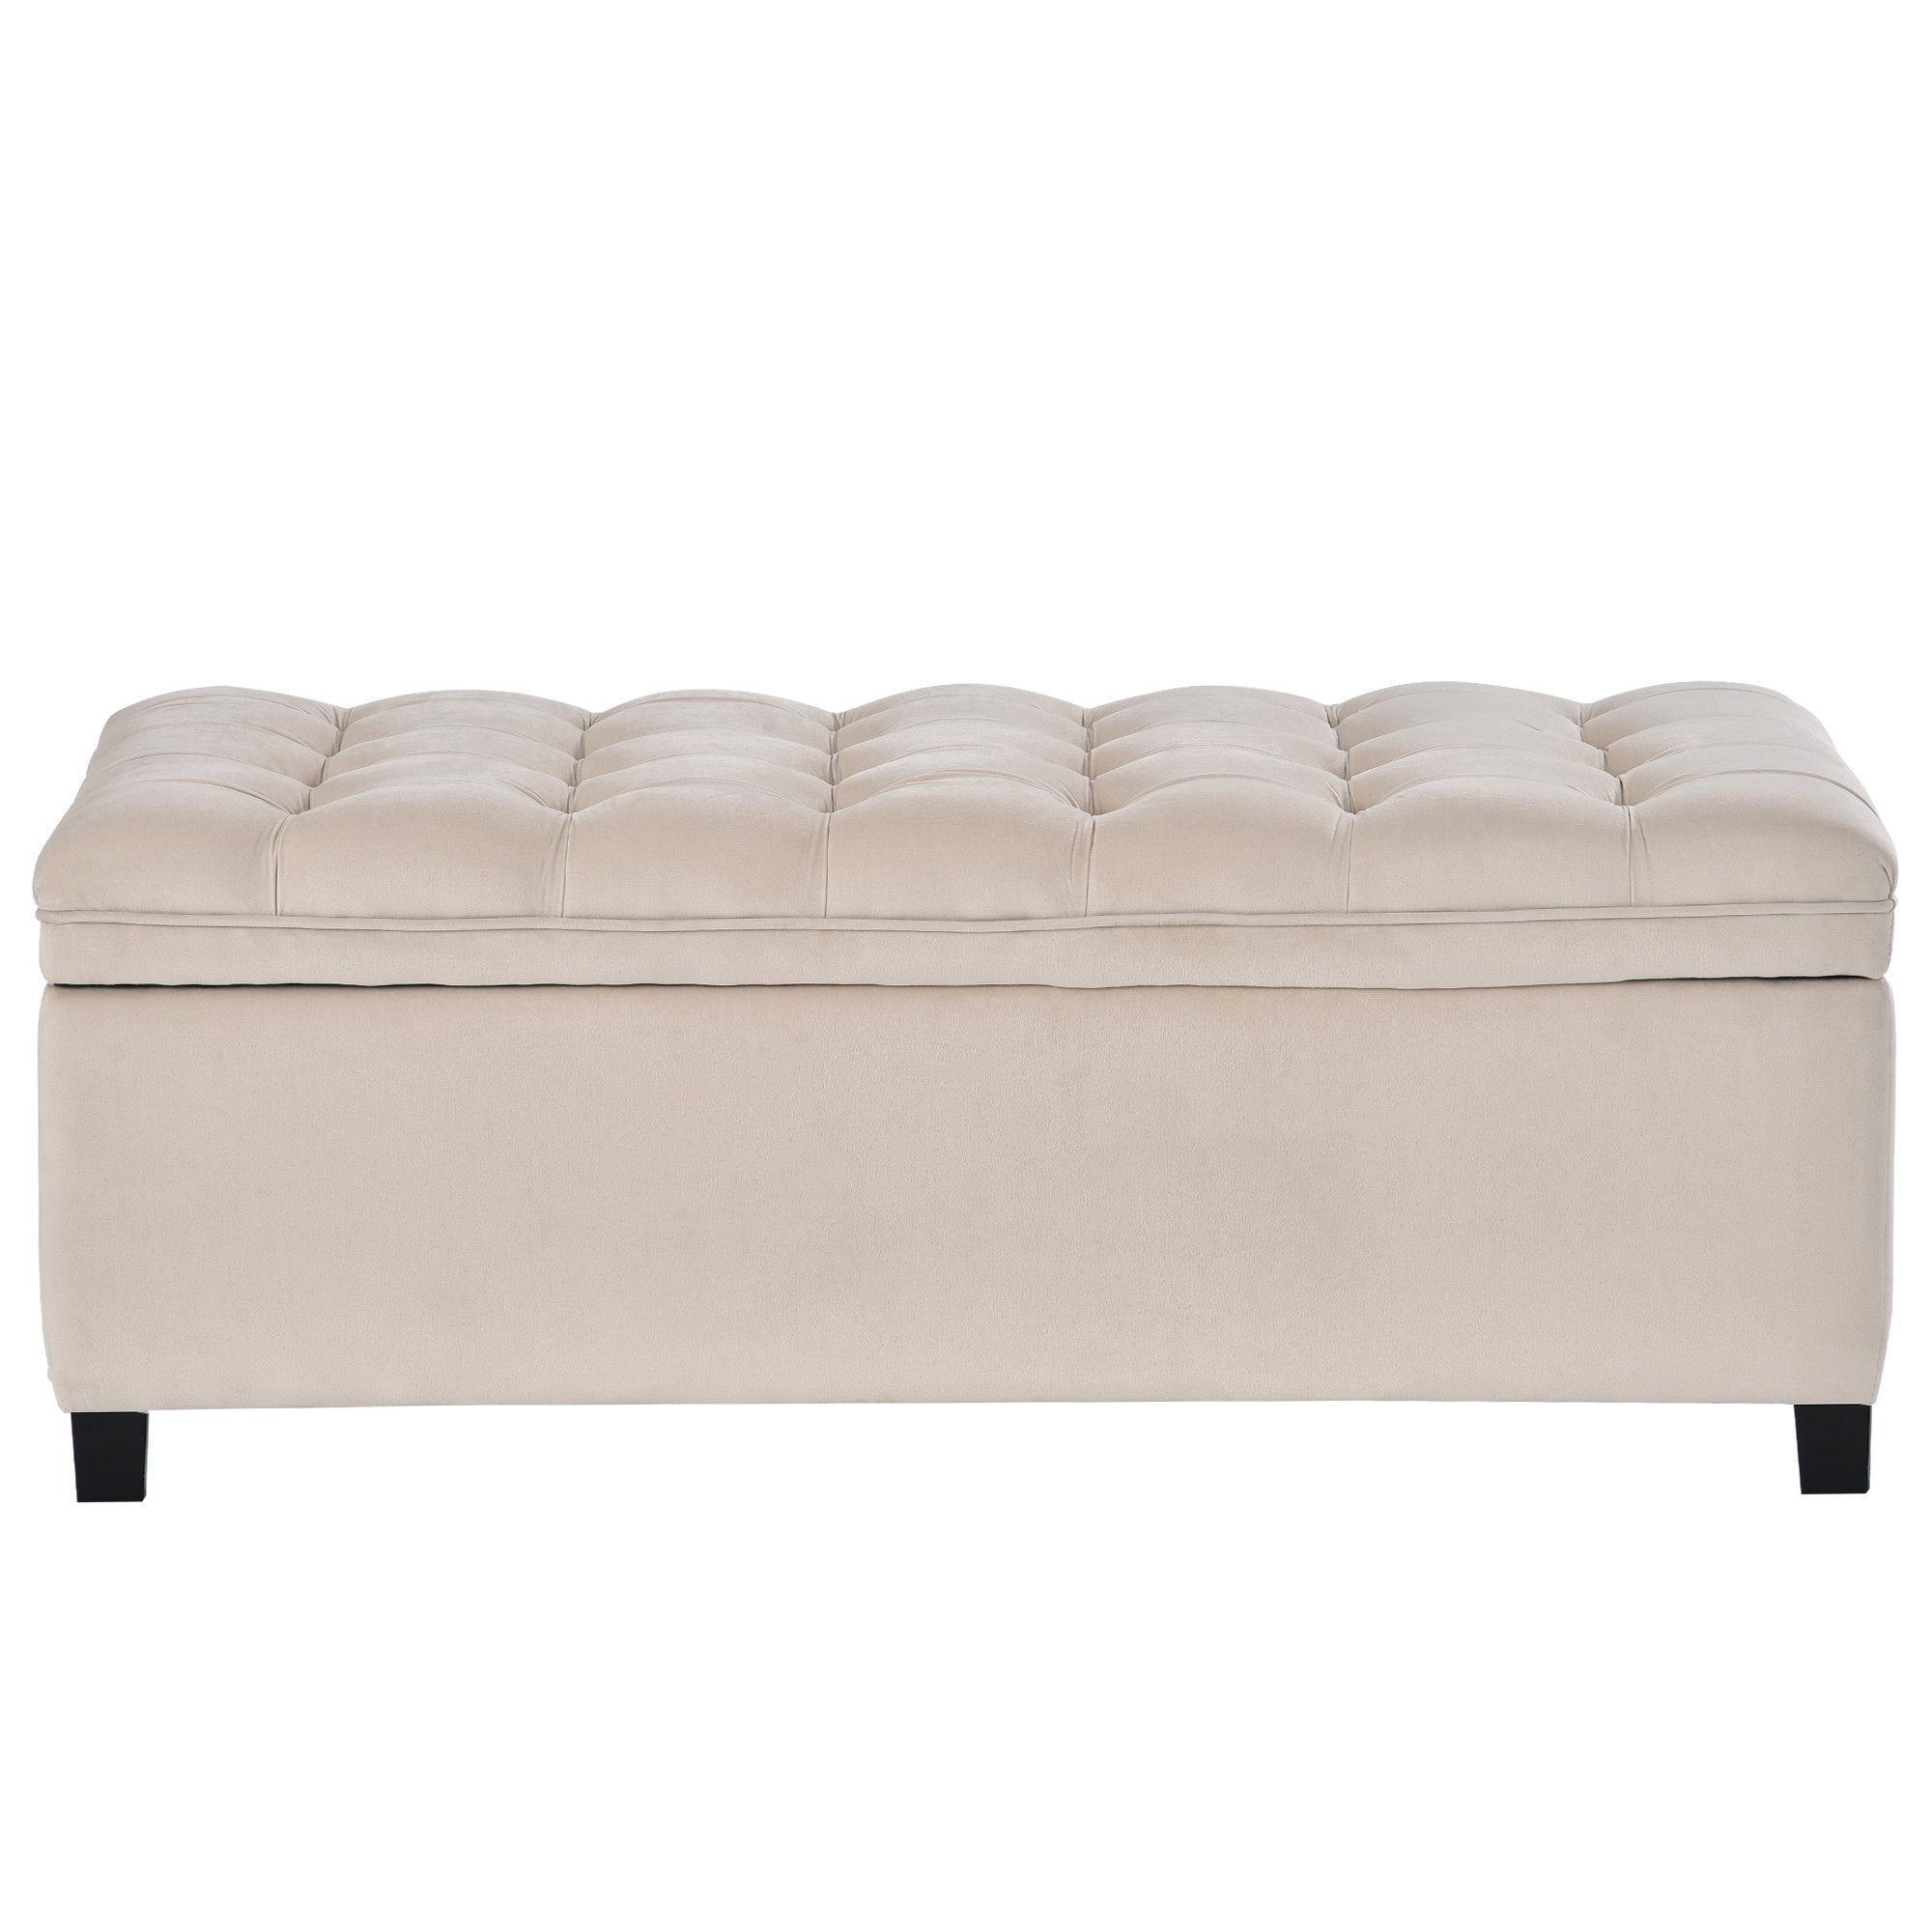 Boyel Living Upholstered Flip Top Storage Bench with Button Tufted Top-Boyel Living